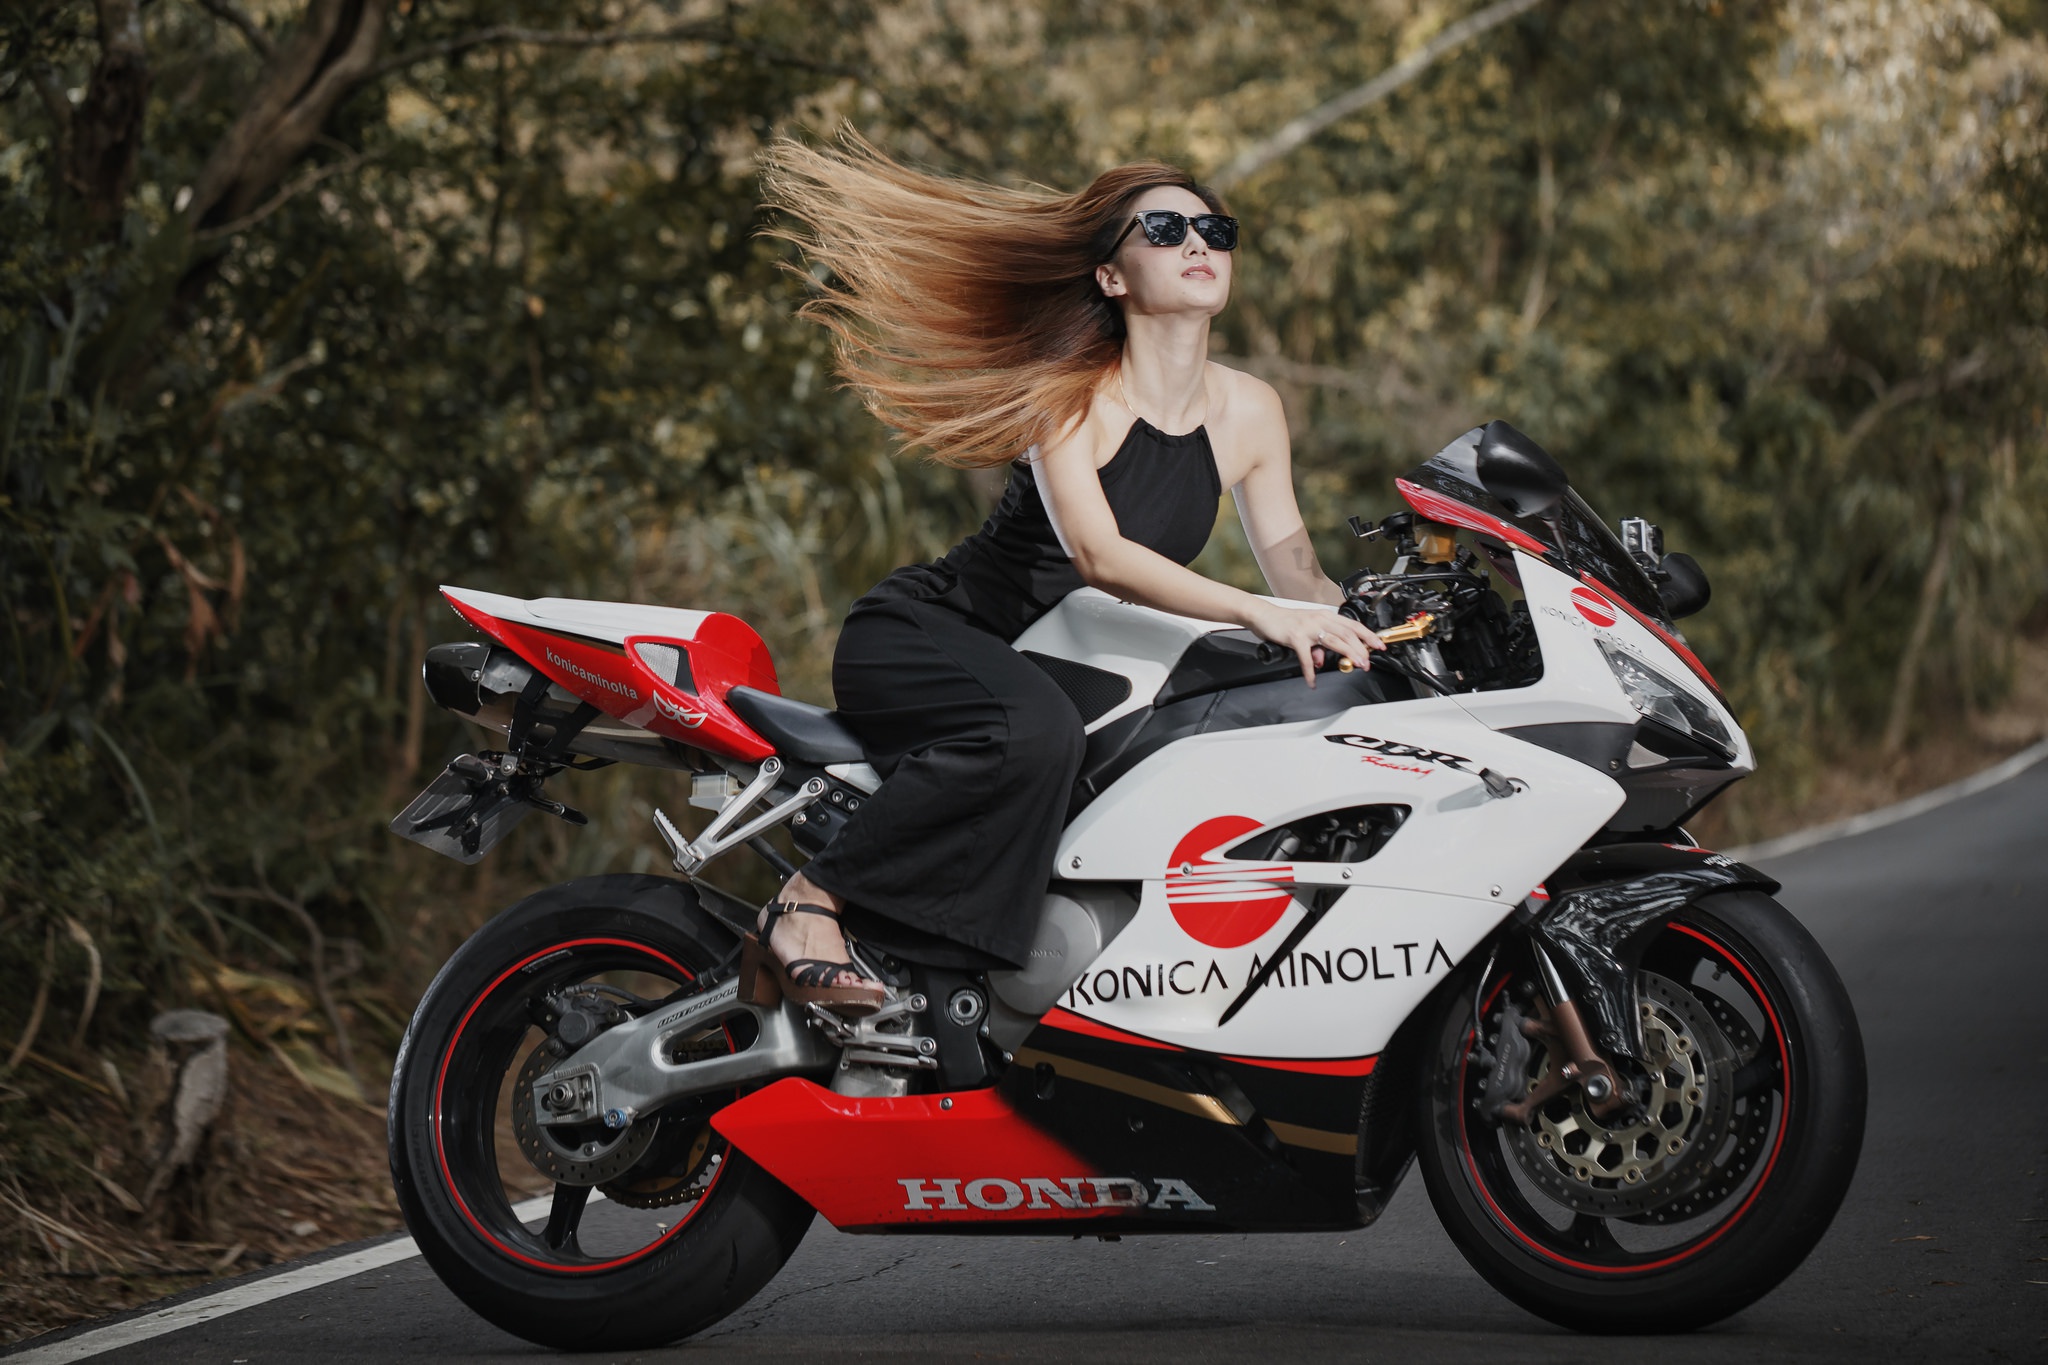 People 2048x1365 Honda motorcycle vehicle Asian women women with shades